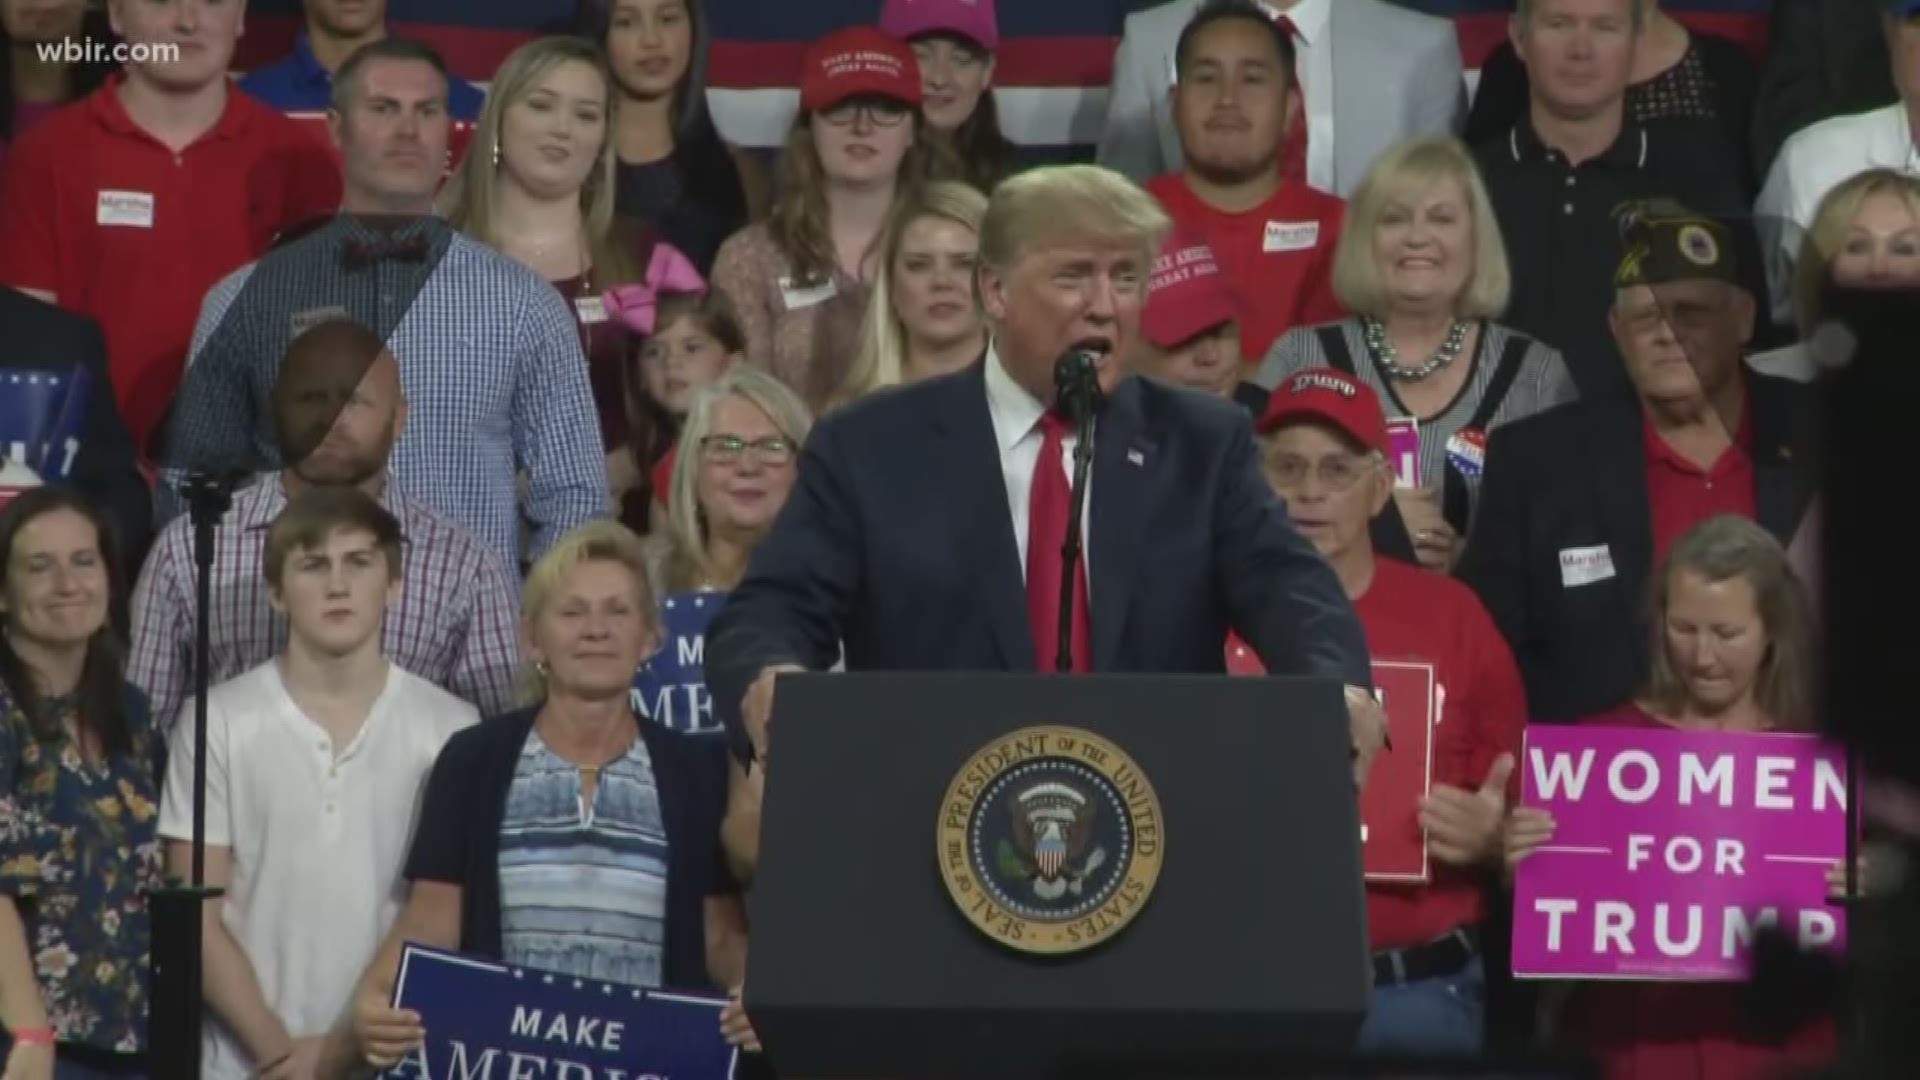 The president was in Johnson City for a campaign event to support Republicans running for office in November.